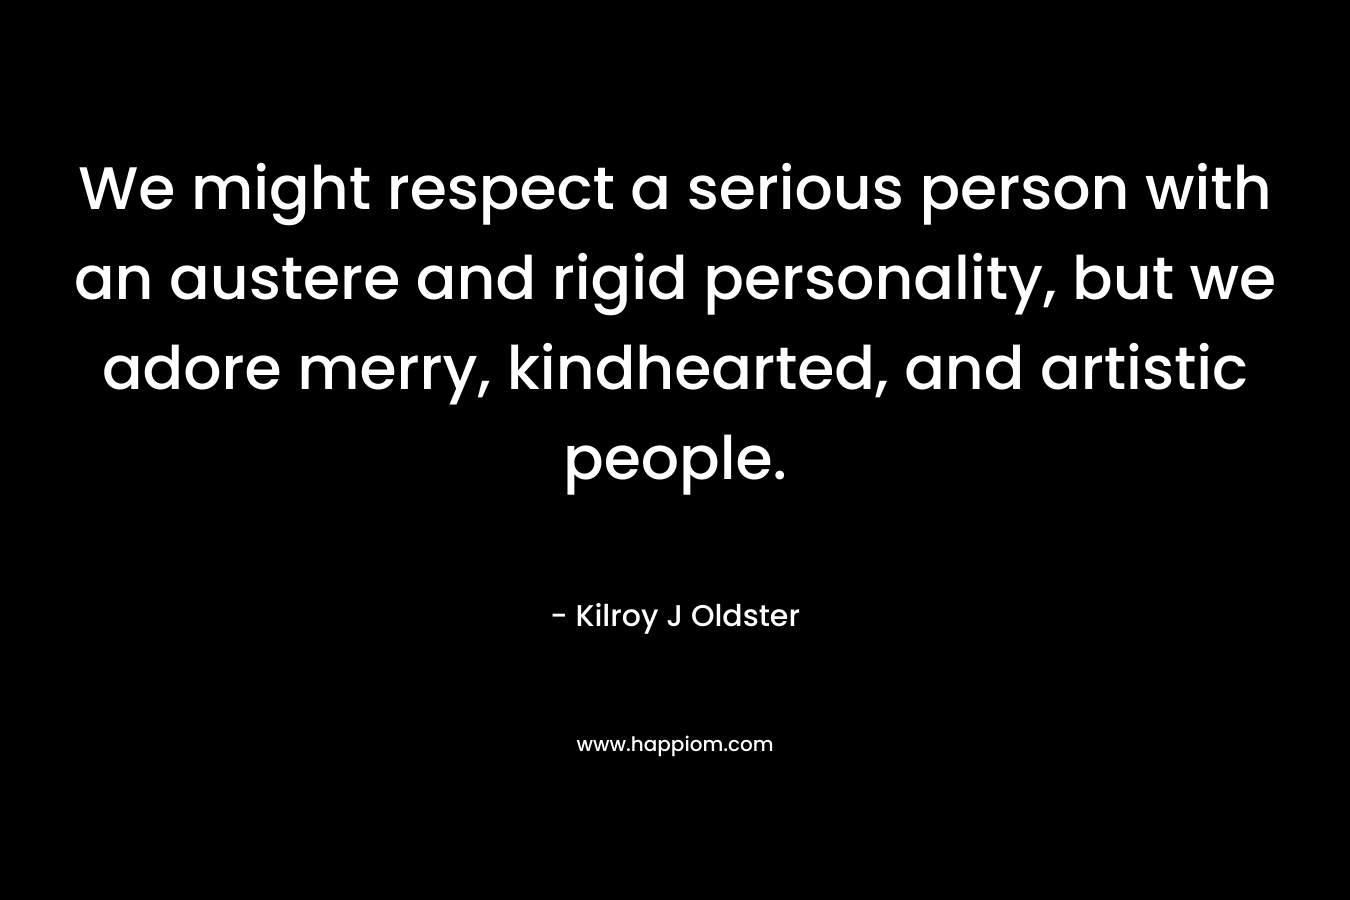 We might respect a serious person with an austere and rigid personality, but we adore merry, kindhearted, and artistic people.